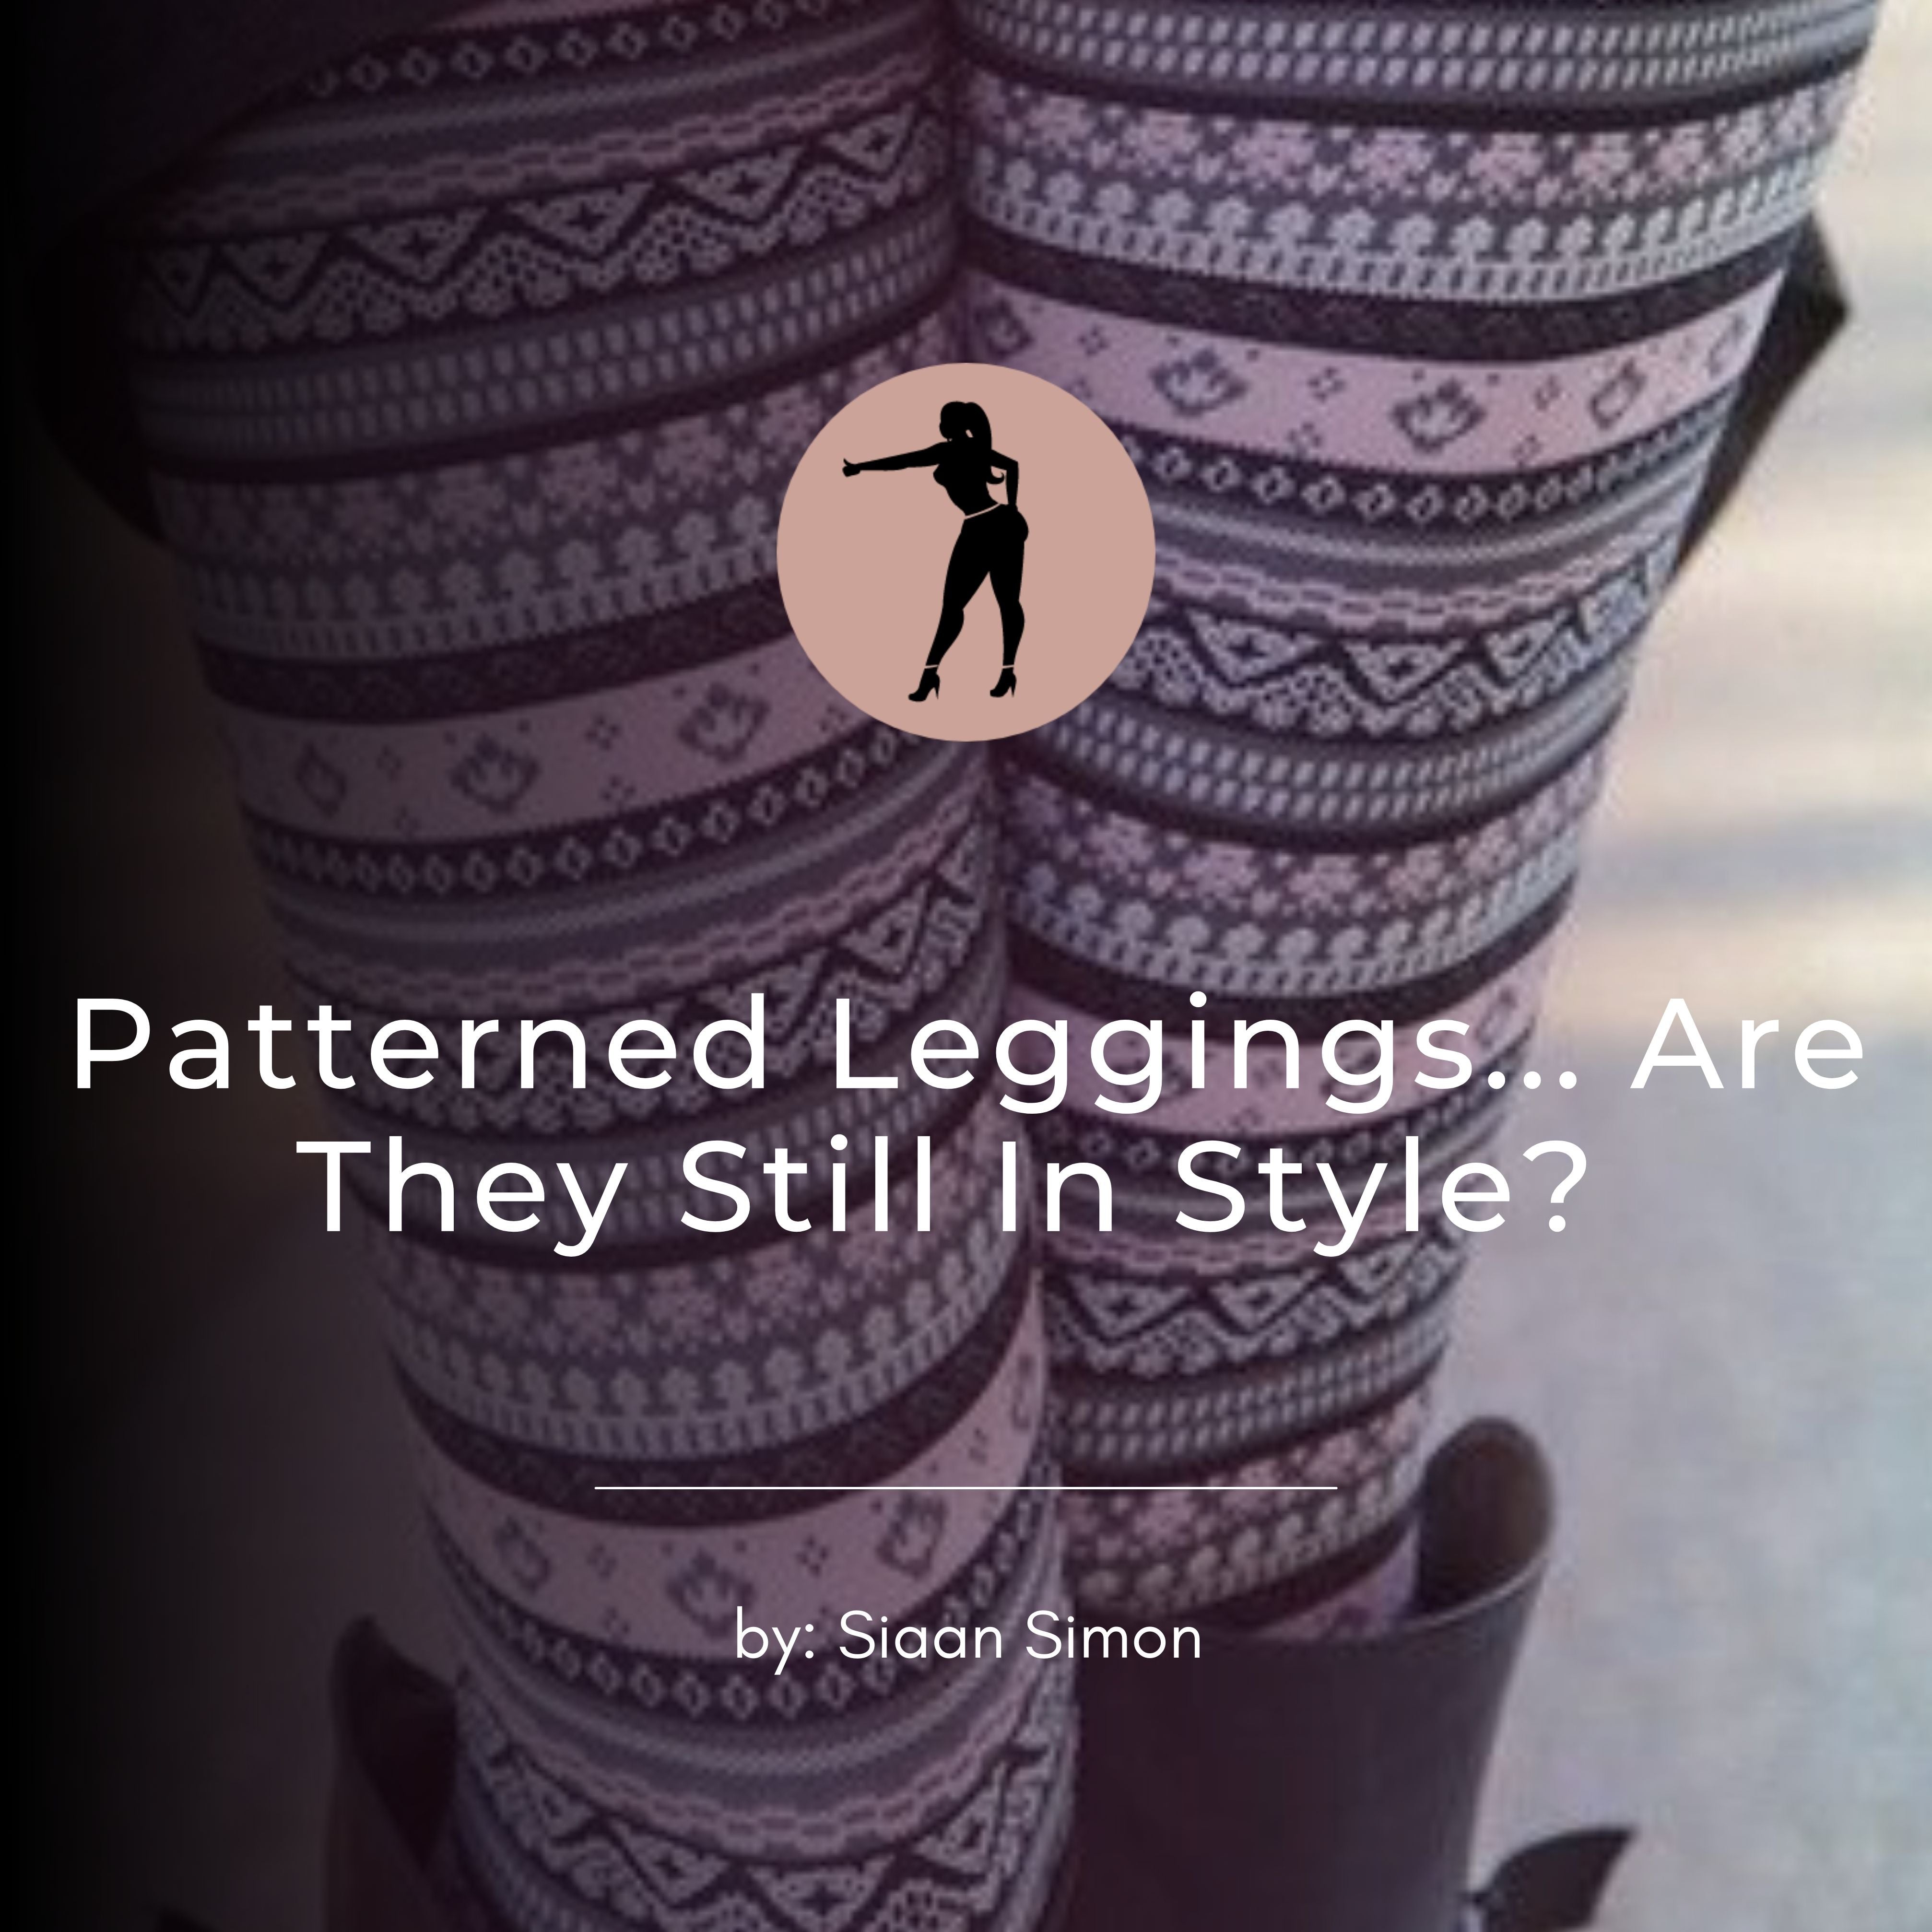 Patterned Leggings... Are They Still In Style?